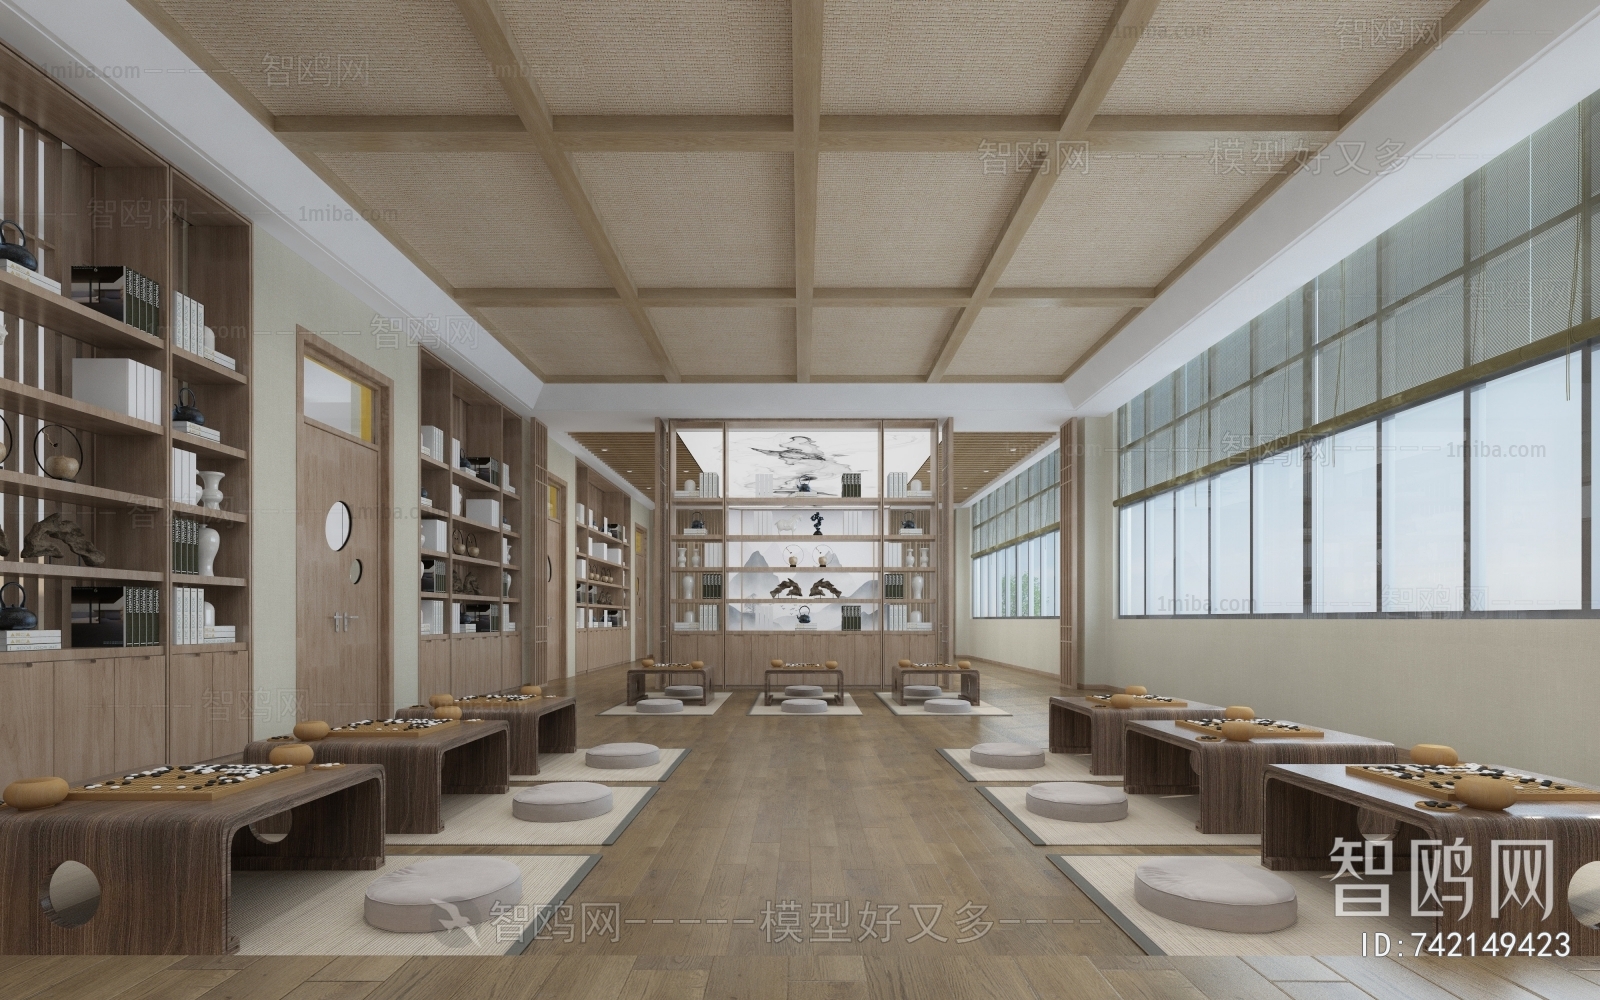 New Chinese Style School Classrooms